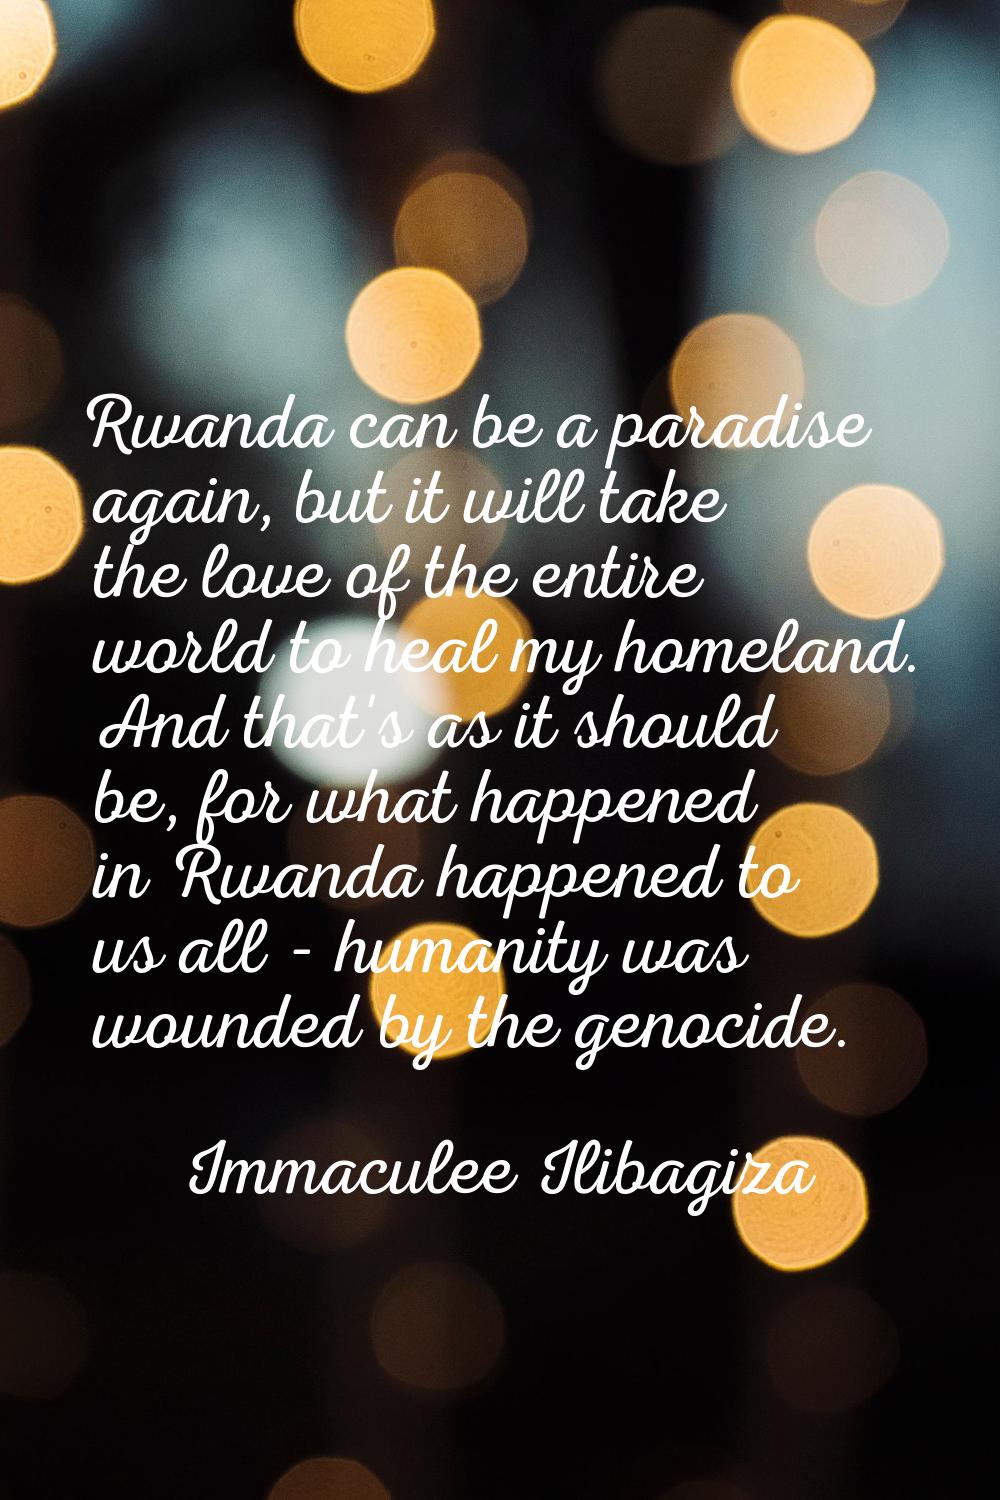 Rwanda can be a paradise again, but it will take the love of the entire world to heal my homeland. 